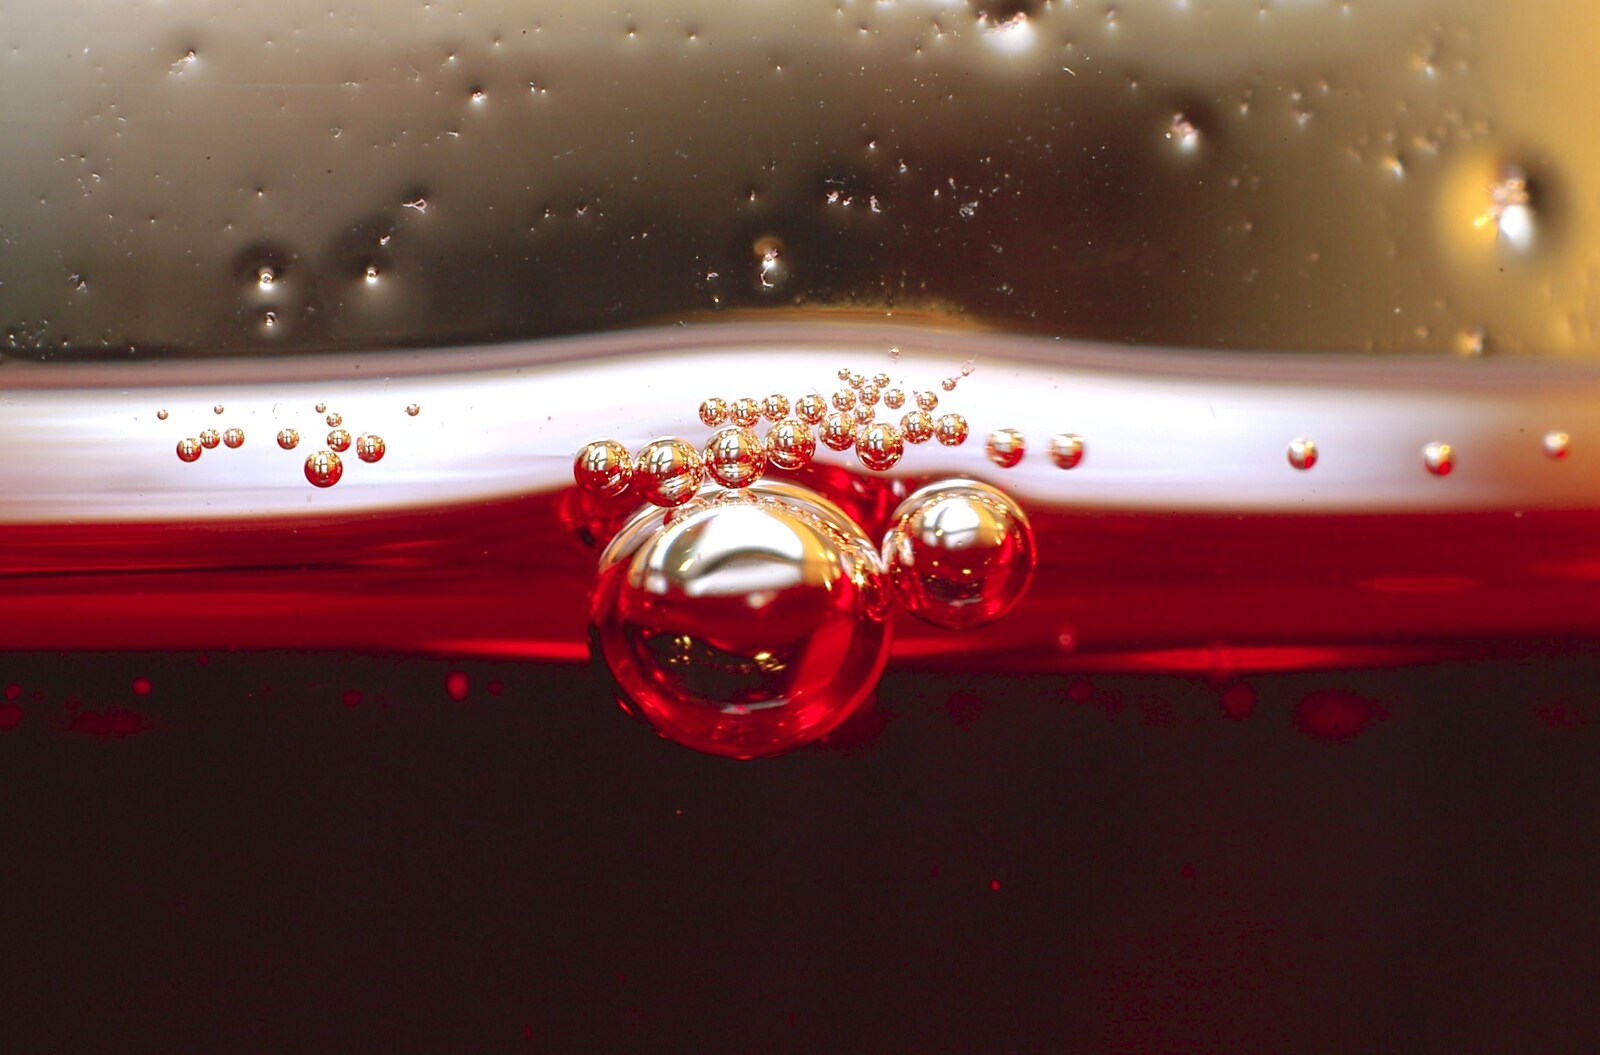 A collection of little bubbles in cranberry juice from Fun With Bellows: Macro Photography, Brome, Suffolk - 13th May 2006